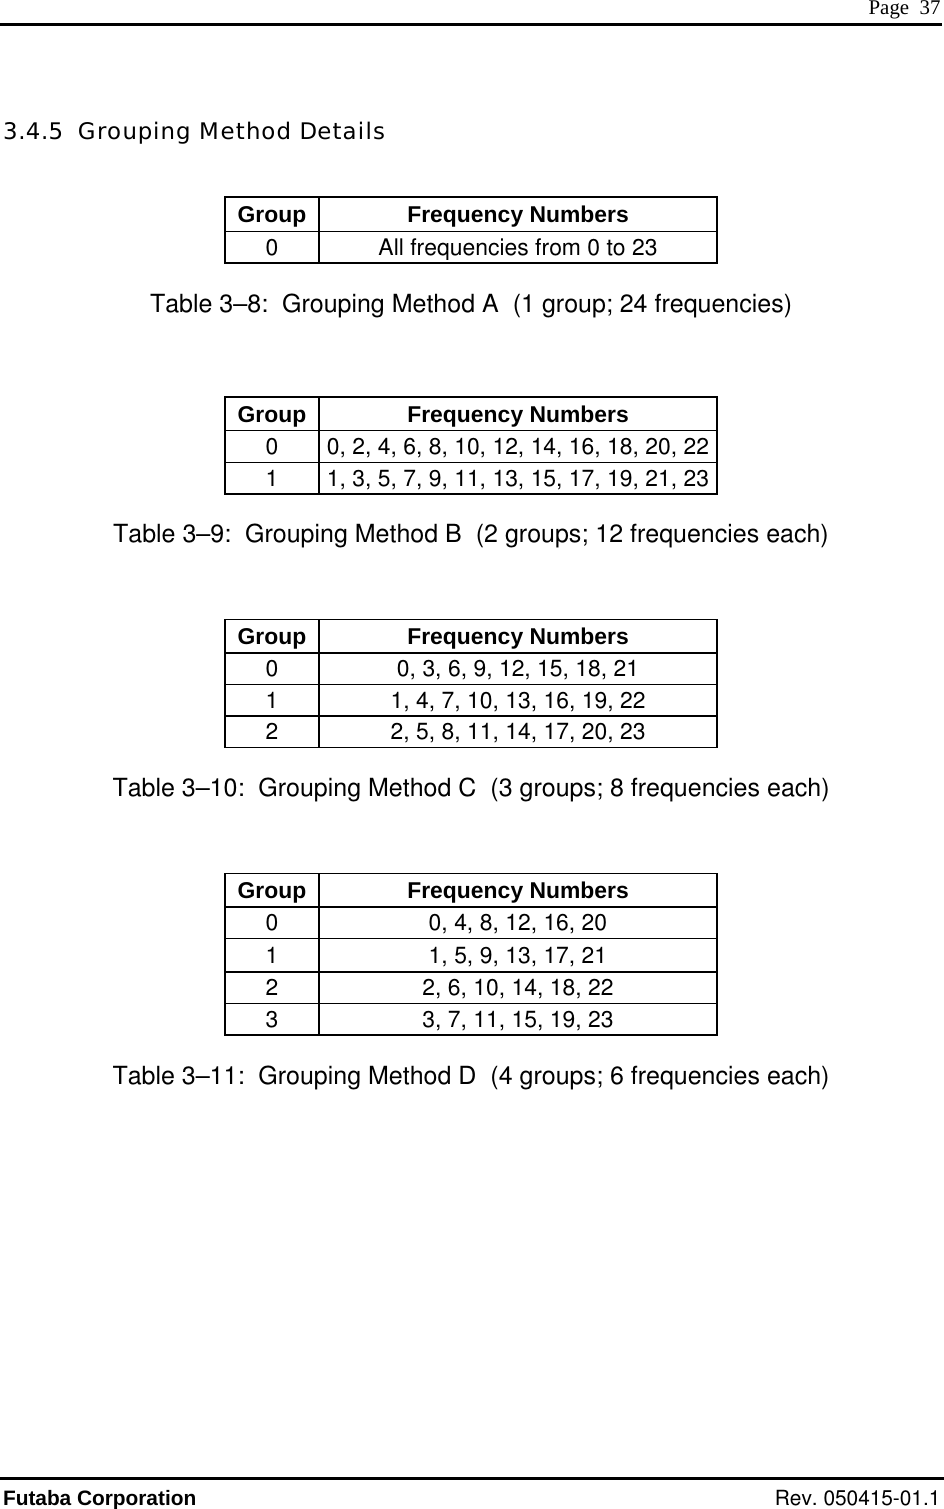  Page  37 3.4.5  Grouping Method Details  Group Frequency Numbers 0  All frequencies from 0 to 23 Table 3–8:  Grouping Method A  (1 group; 24 frequencies)  Group Frequency Numbers 0  0, 2, 4, 6, 8, 10, 12, 14, 16, 18, 20, 22 1  1, 3, 5, 7, 9, 11, 13, 15, 17, 19, 21, 23 Table 3–9:  Grouping Method B  (2 groups; 12 frequencies each)  Group Frequency Numbers 0  0, 3, 6, 9, 12, 15, 18, 21 1  1, 4, 7, 10, 13, 16, 19, 22 2  2, 5, 8, 11, 14, 17, 20, 23 Table 3–10:  Grouping Method C  (3 groups; 8 frequencies each)  Group Frequency Numbers 0  0, 4, 8, 12, 16, 20 1  1, 5, 9, 13, 17, 21 2  2, 6, 10, 14, 18, 22 3  3, 7, 11, 15, 19, 23 Table 3–11:  Grouping Method D  (4 groups; 6 frequencies each) Futaba Corporation Rev. 050415-01.1 